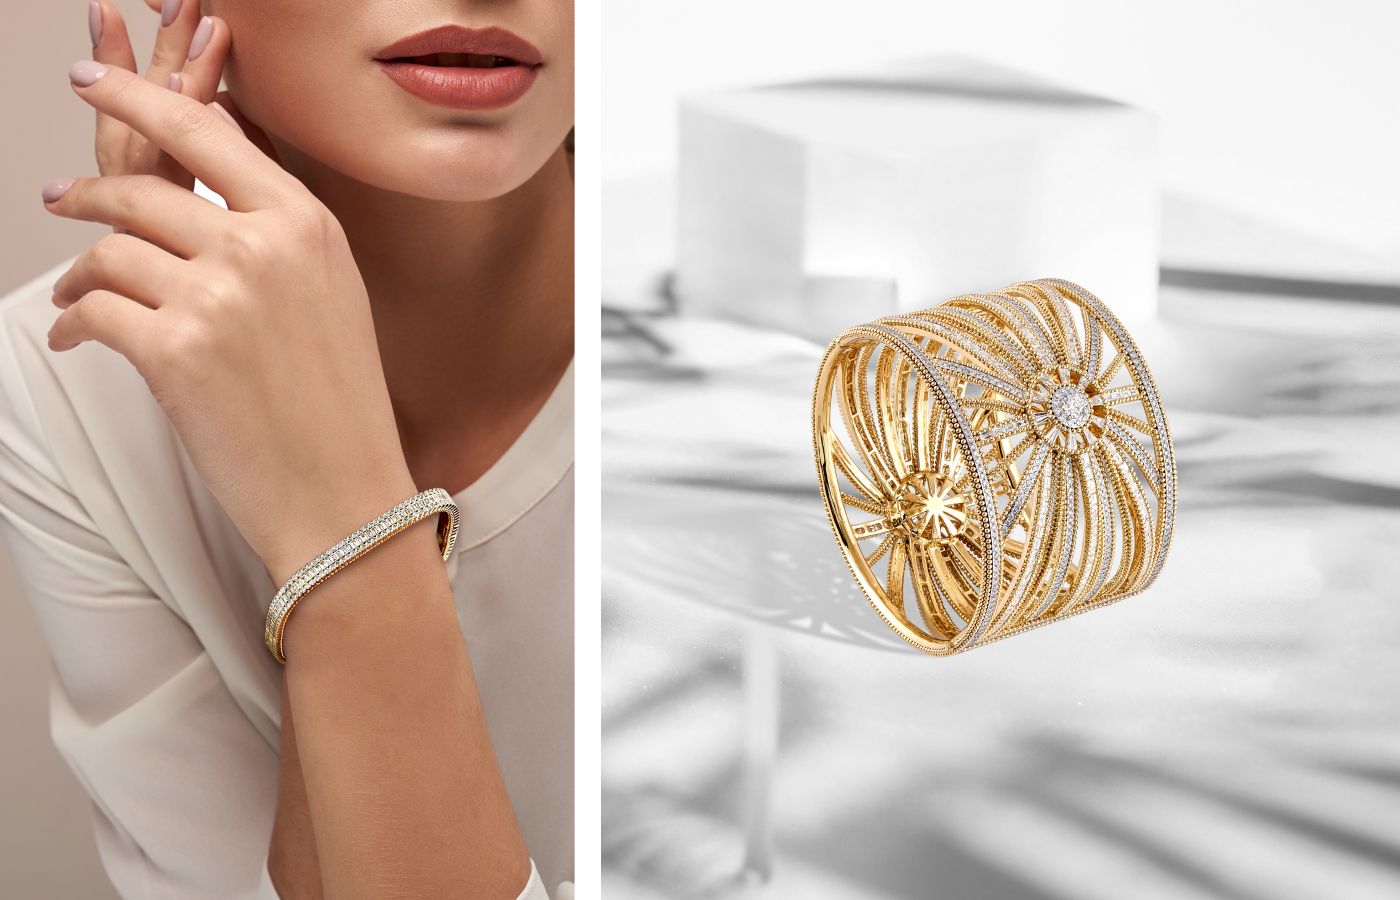 Pieces from the Harakh Sunlight collection crafted in 18k yellow gold and set with diamonds